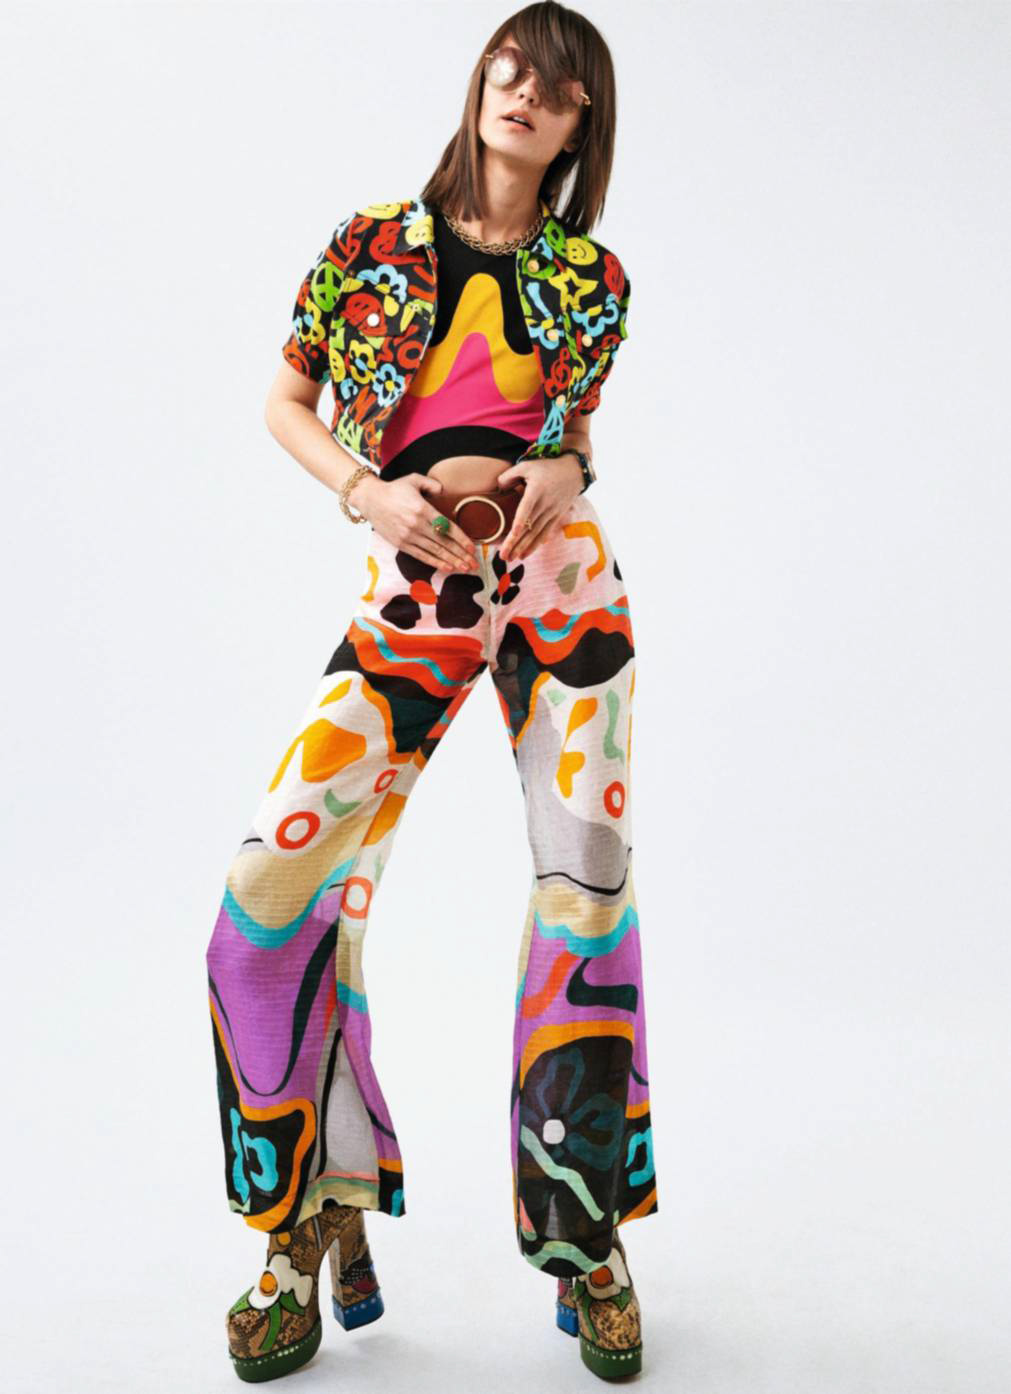 Heloise Giraud Fronts 'She's A Rainbow' By Andoni & Arantxa For Grazia ...